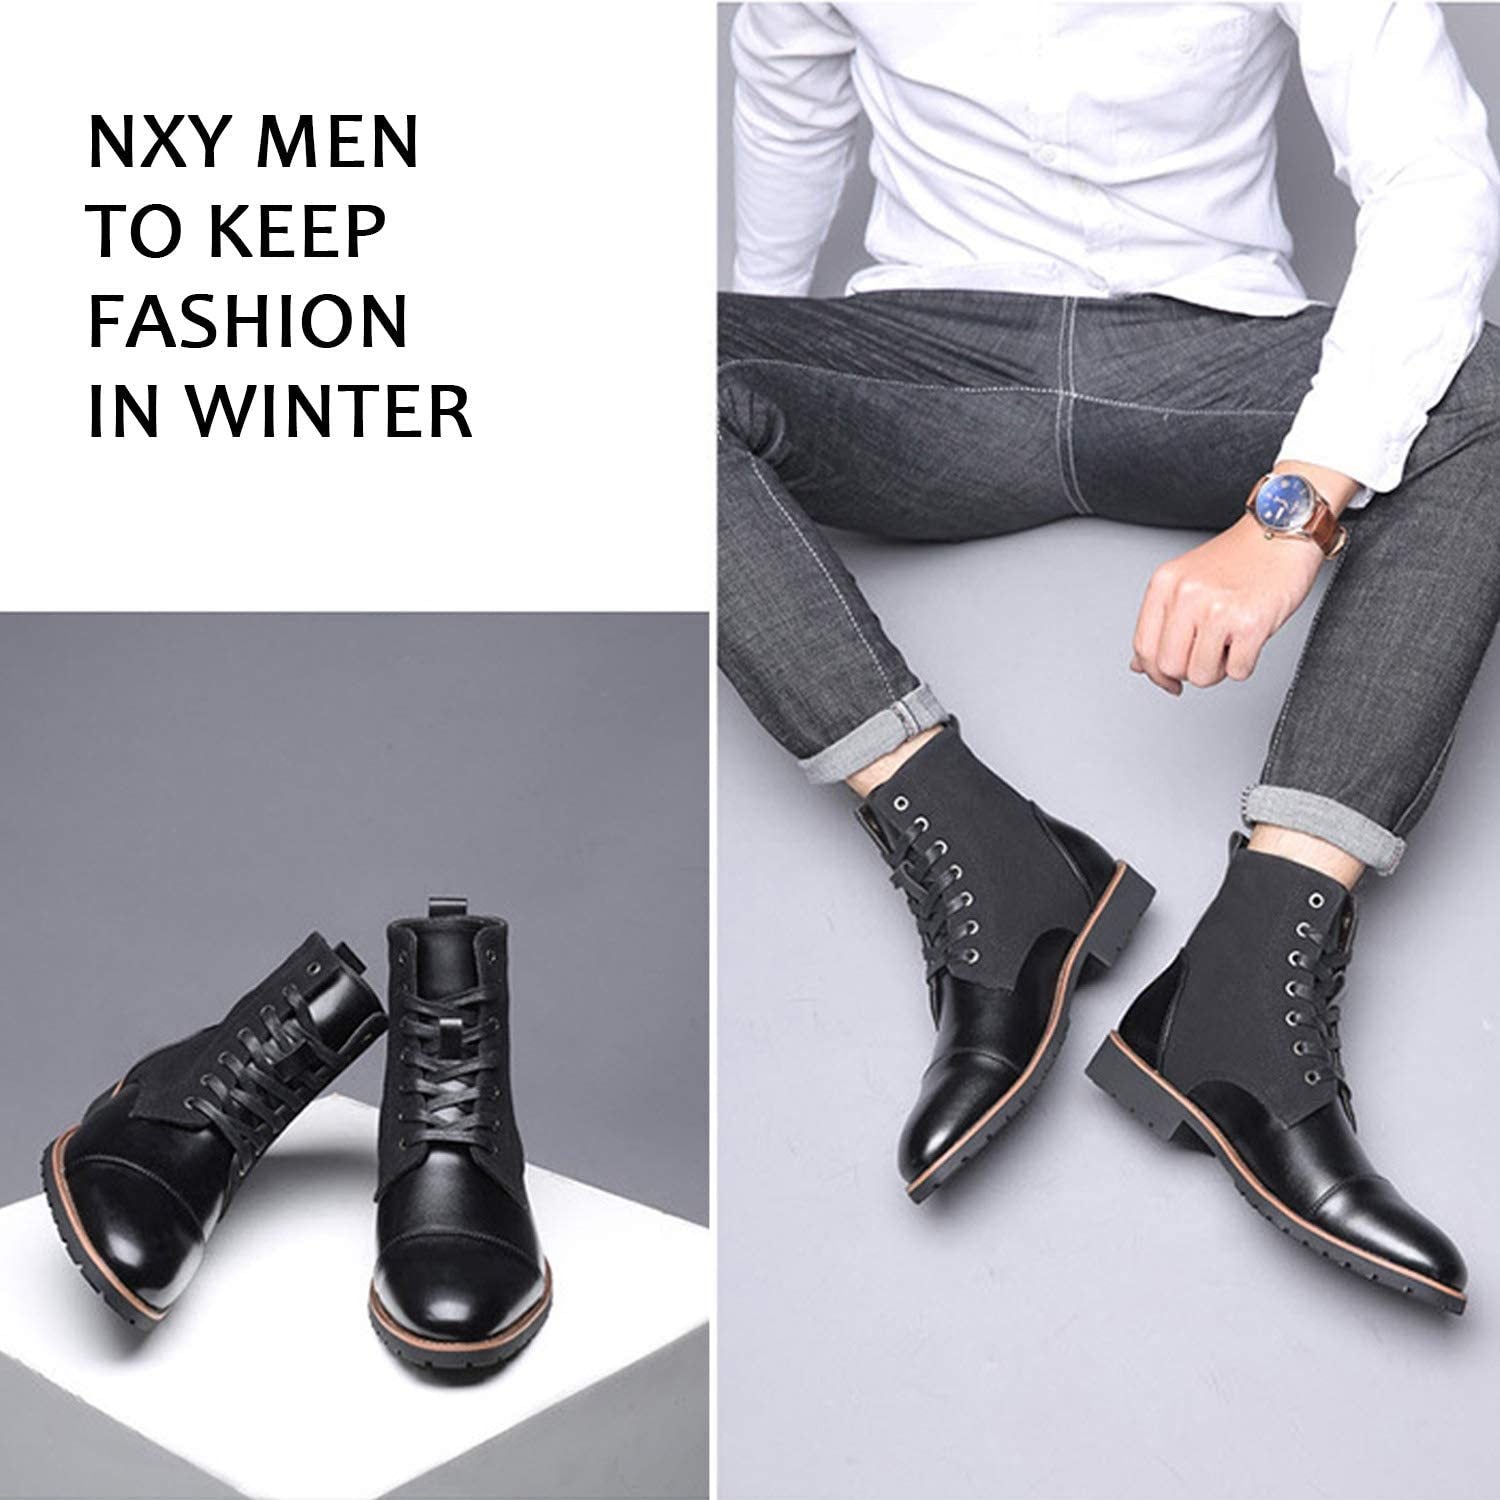 NXY Men's Brown &amp; Black Chelsea Boots - Premium PU Leather Chukka Boots for Men, High Top Pointed Toe Winter Fashion Martin Boots with Lace